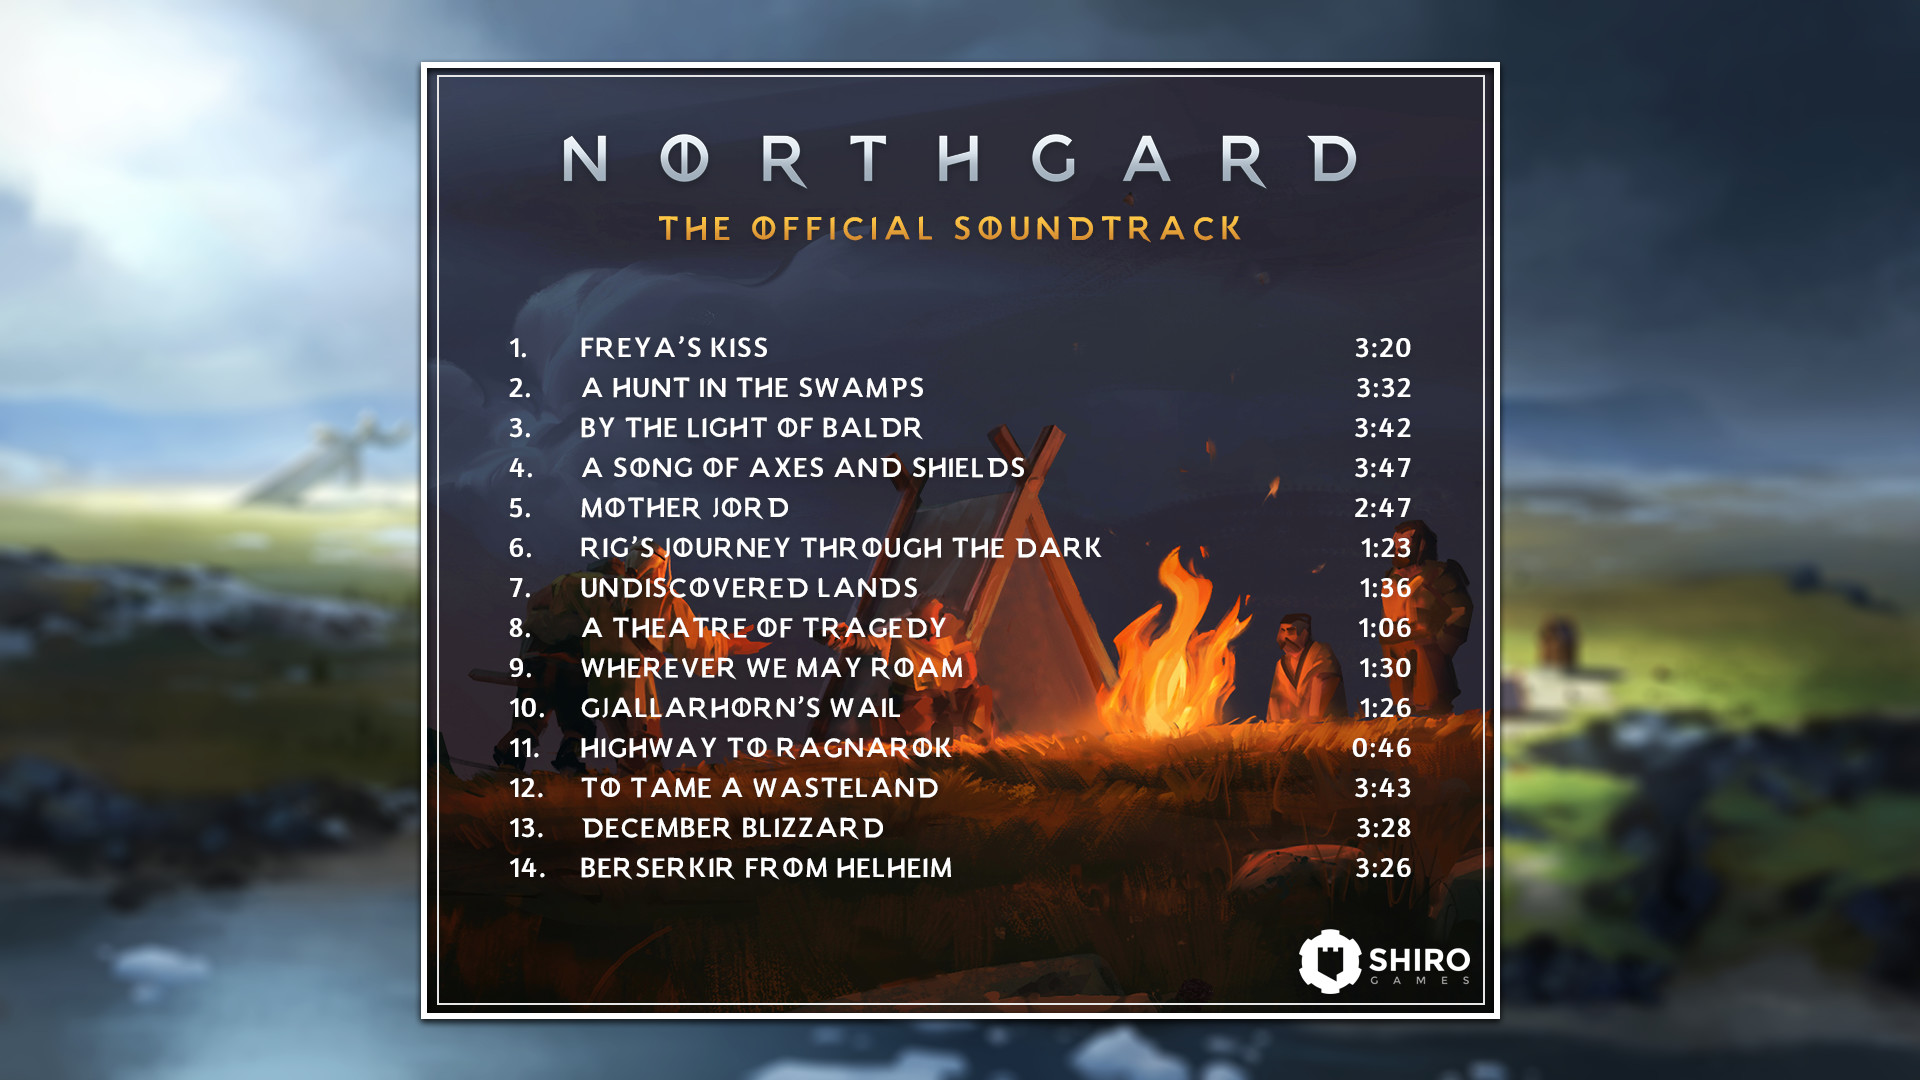 Northgard - The Official Soundtrack Featured Screenshot #1